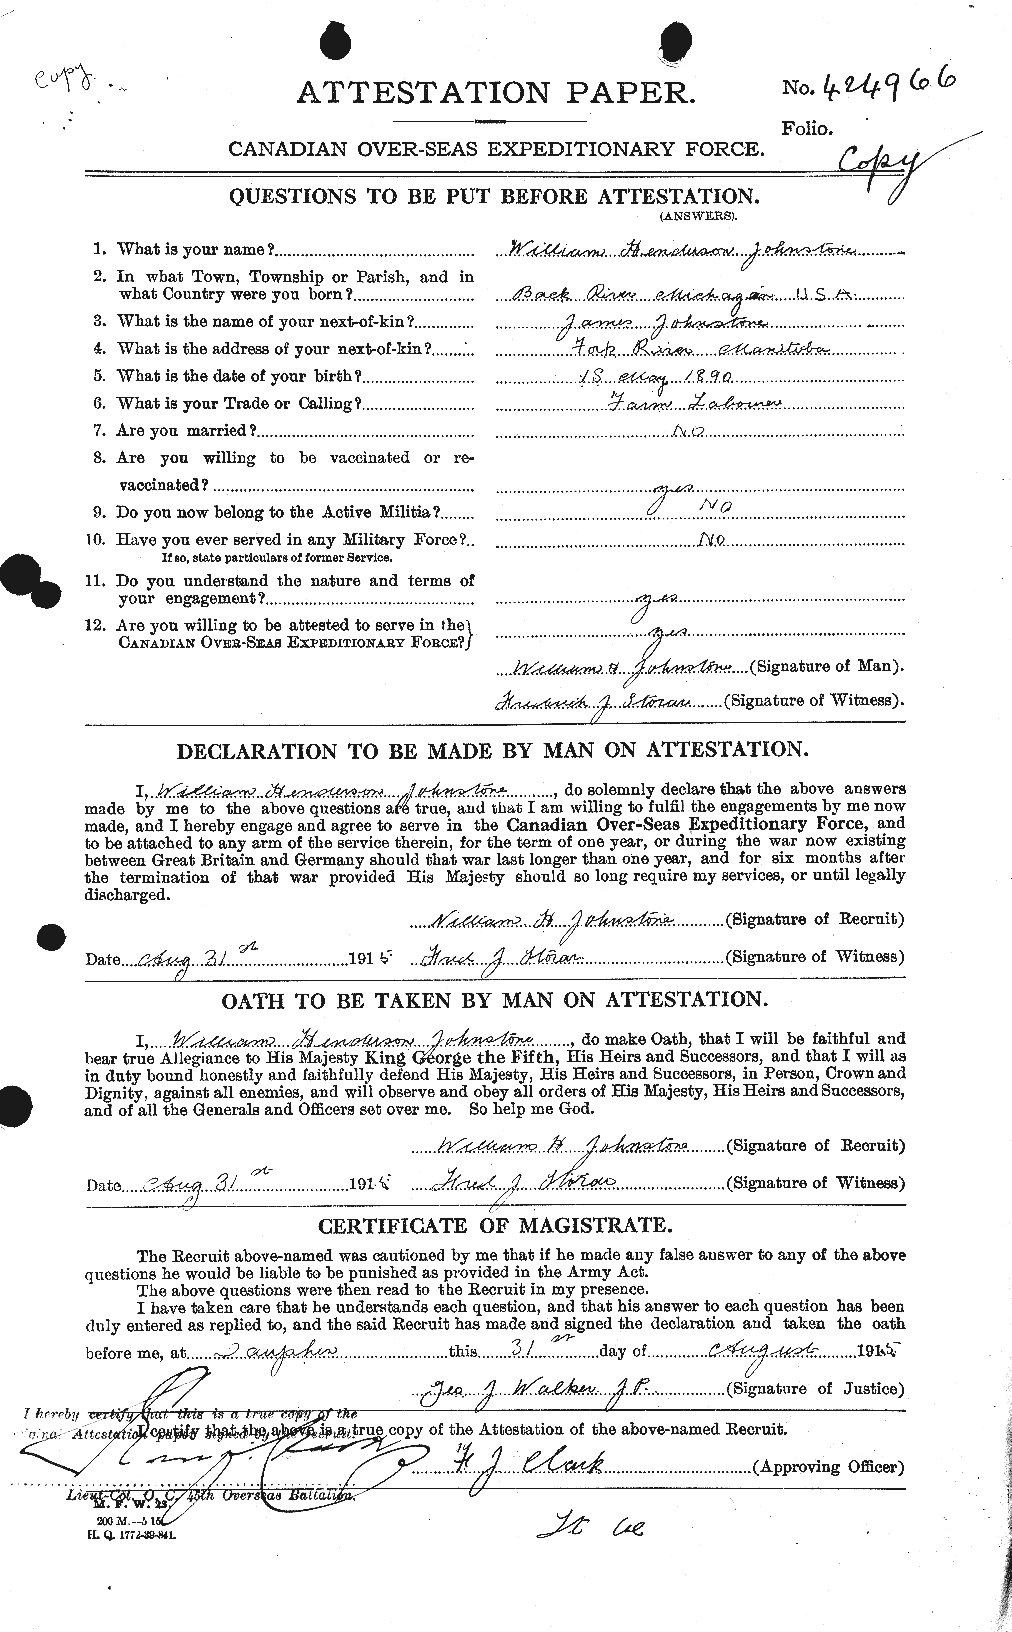 Personnel Records of the First World War - CEF 419755a